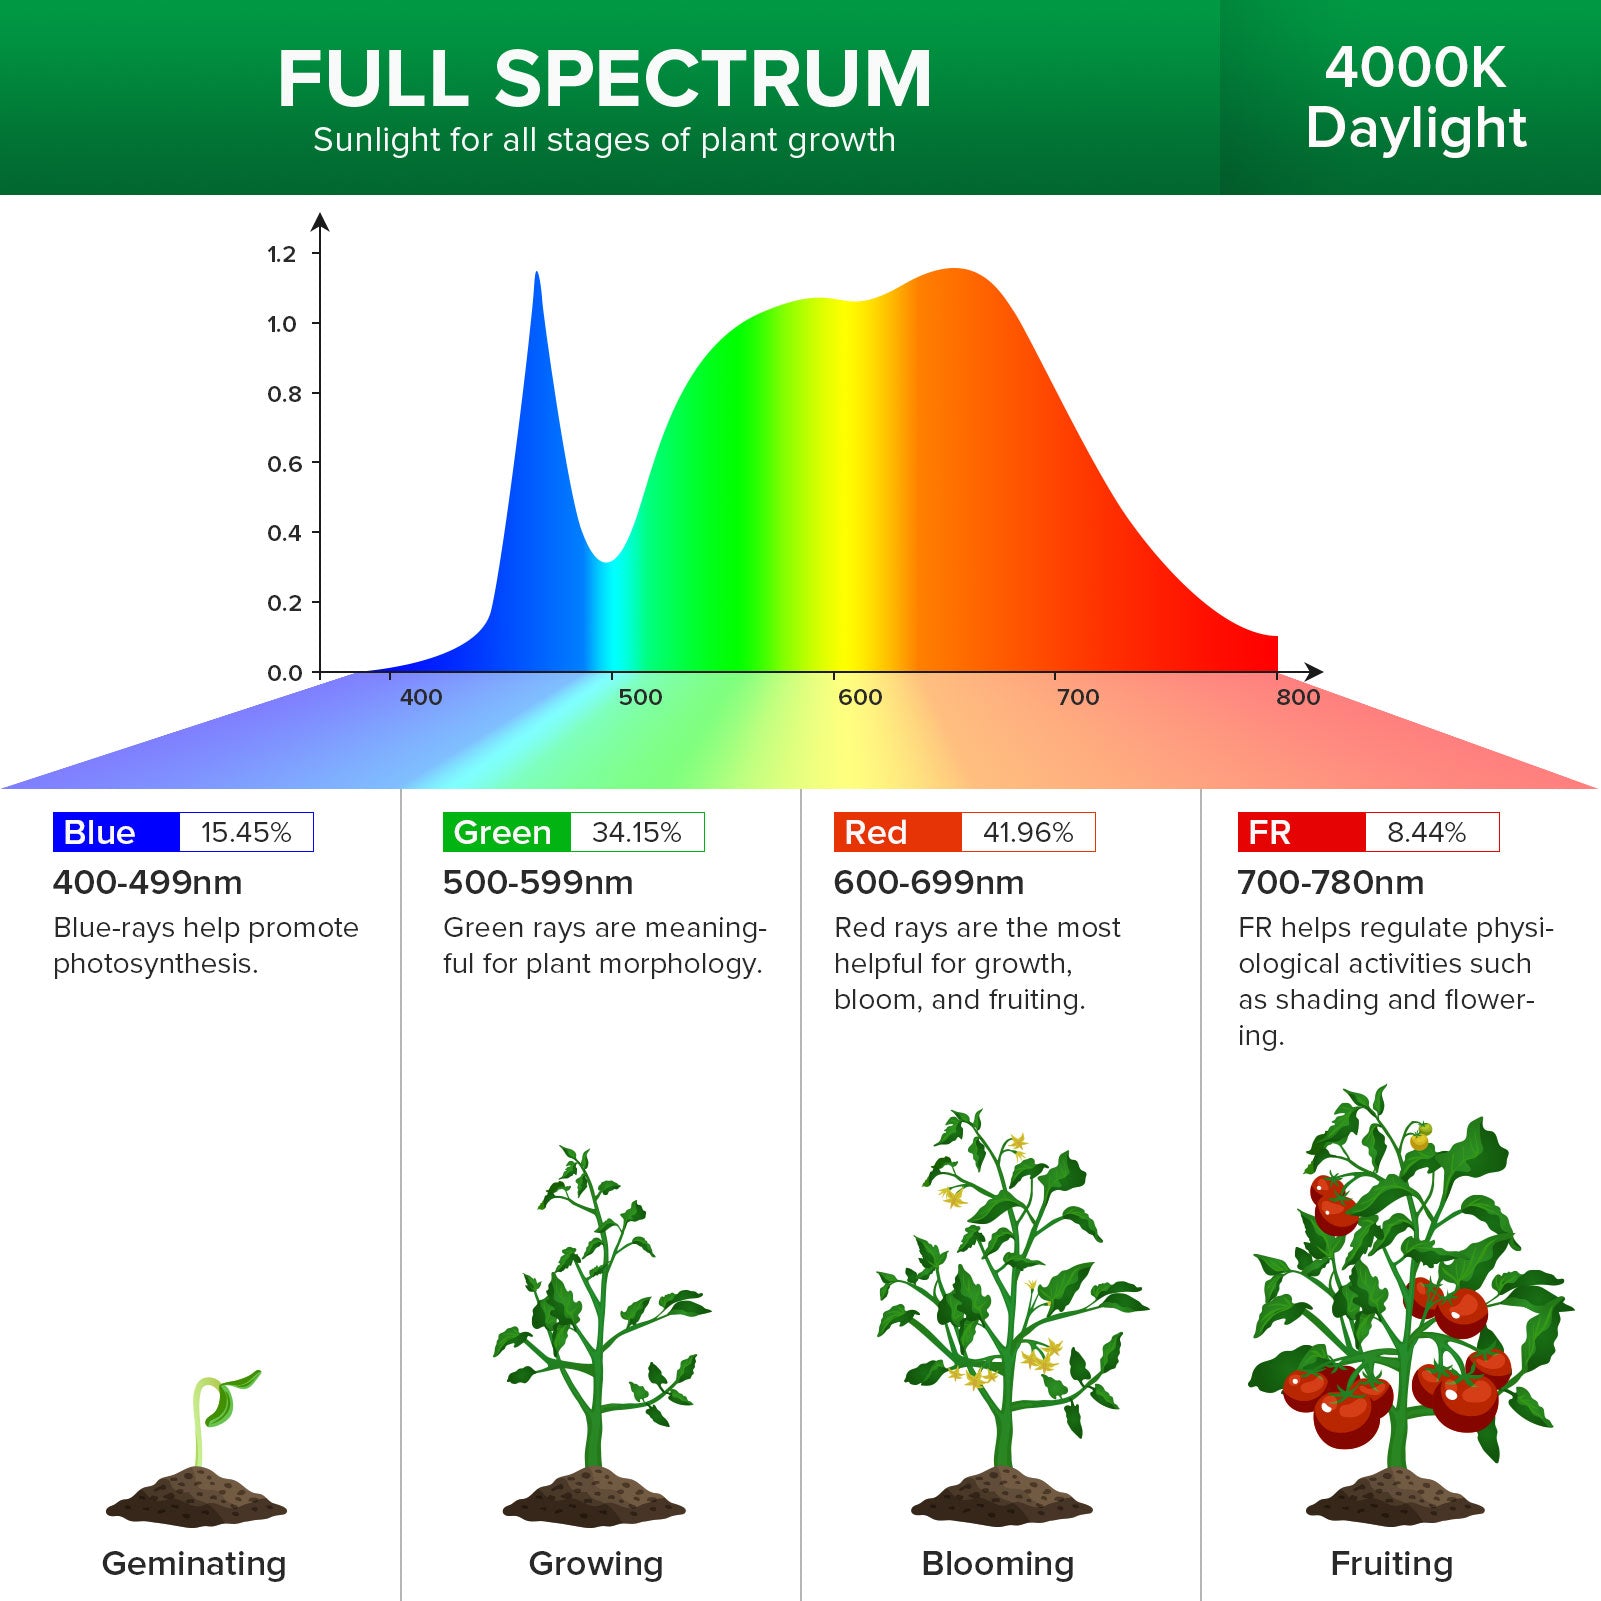 PAR25 10W Smart Grow Light Bulb with APP Control and full spectrum, sunlight for all stages of plant growth